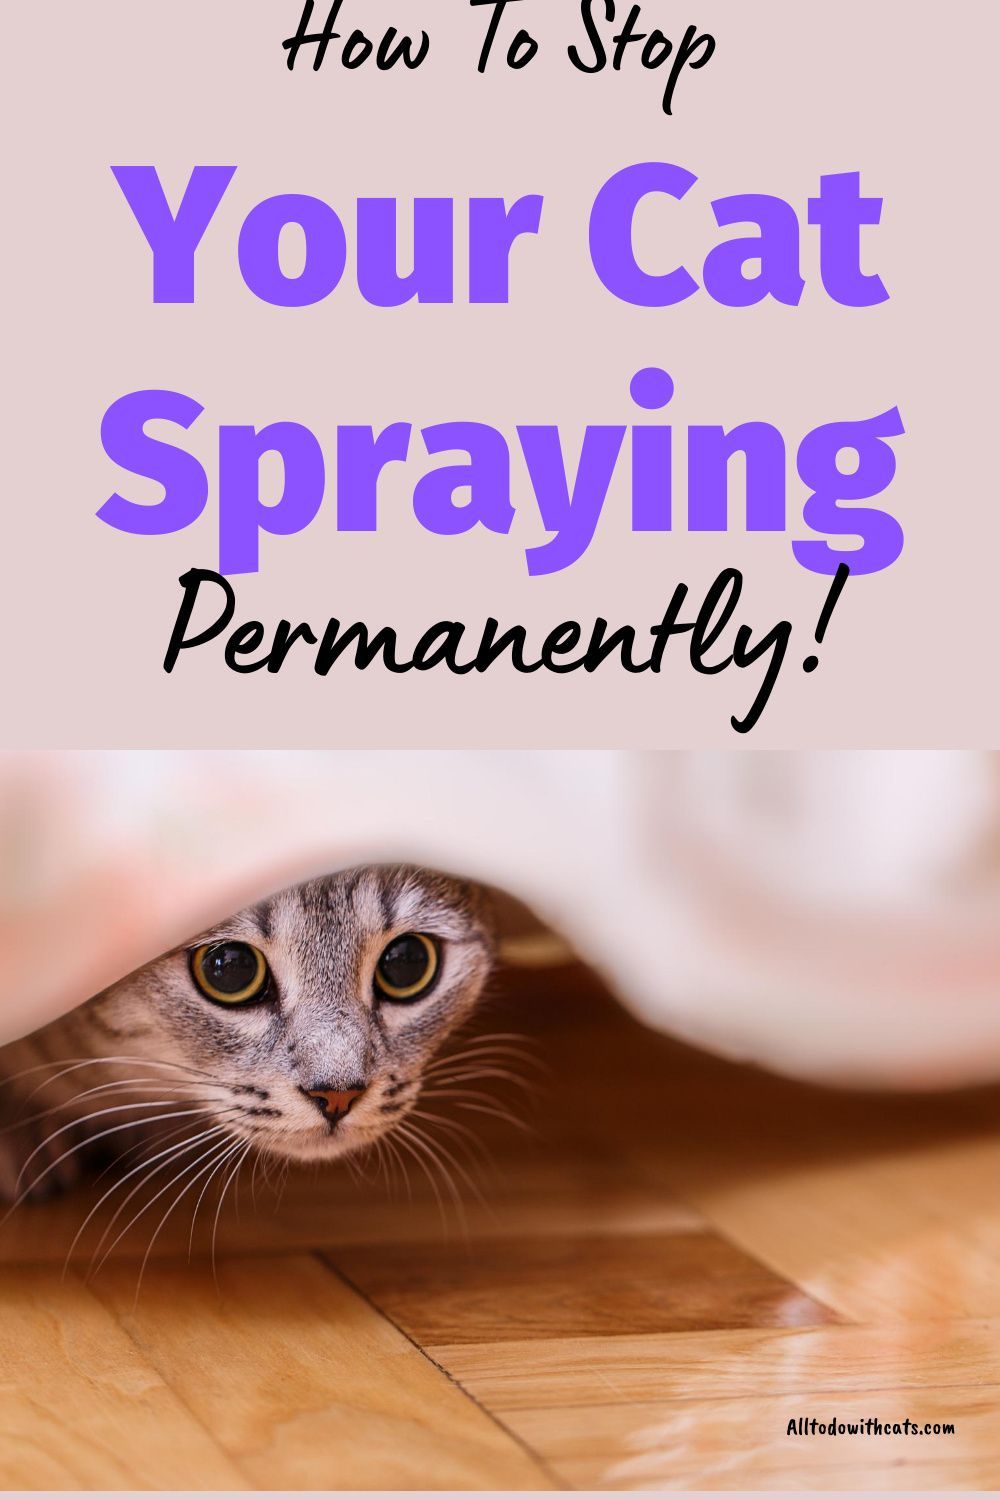 How To Stop Your Cat Spraying Permanently